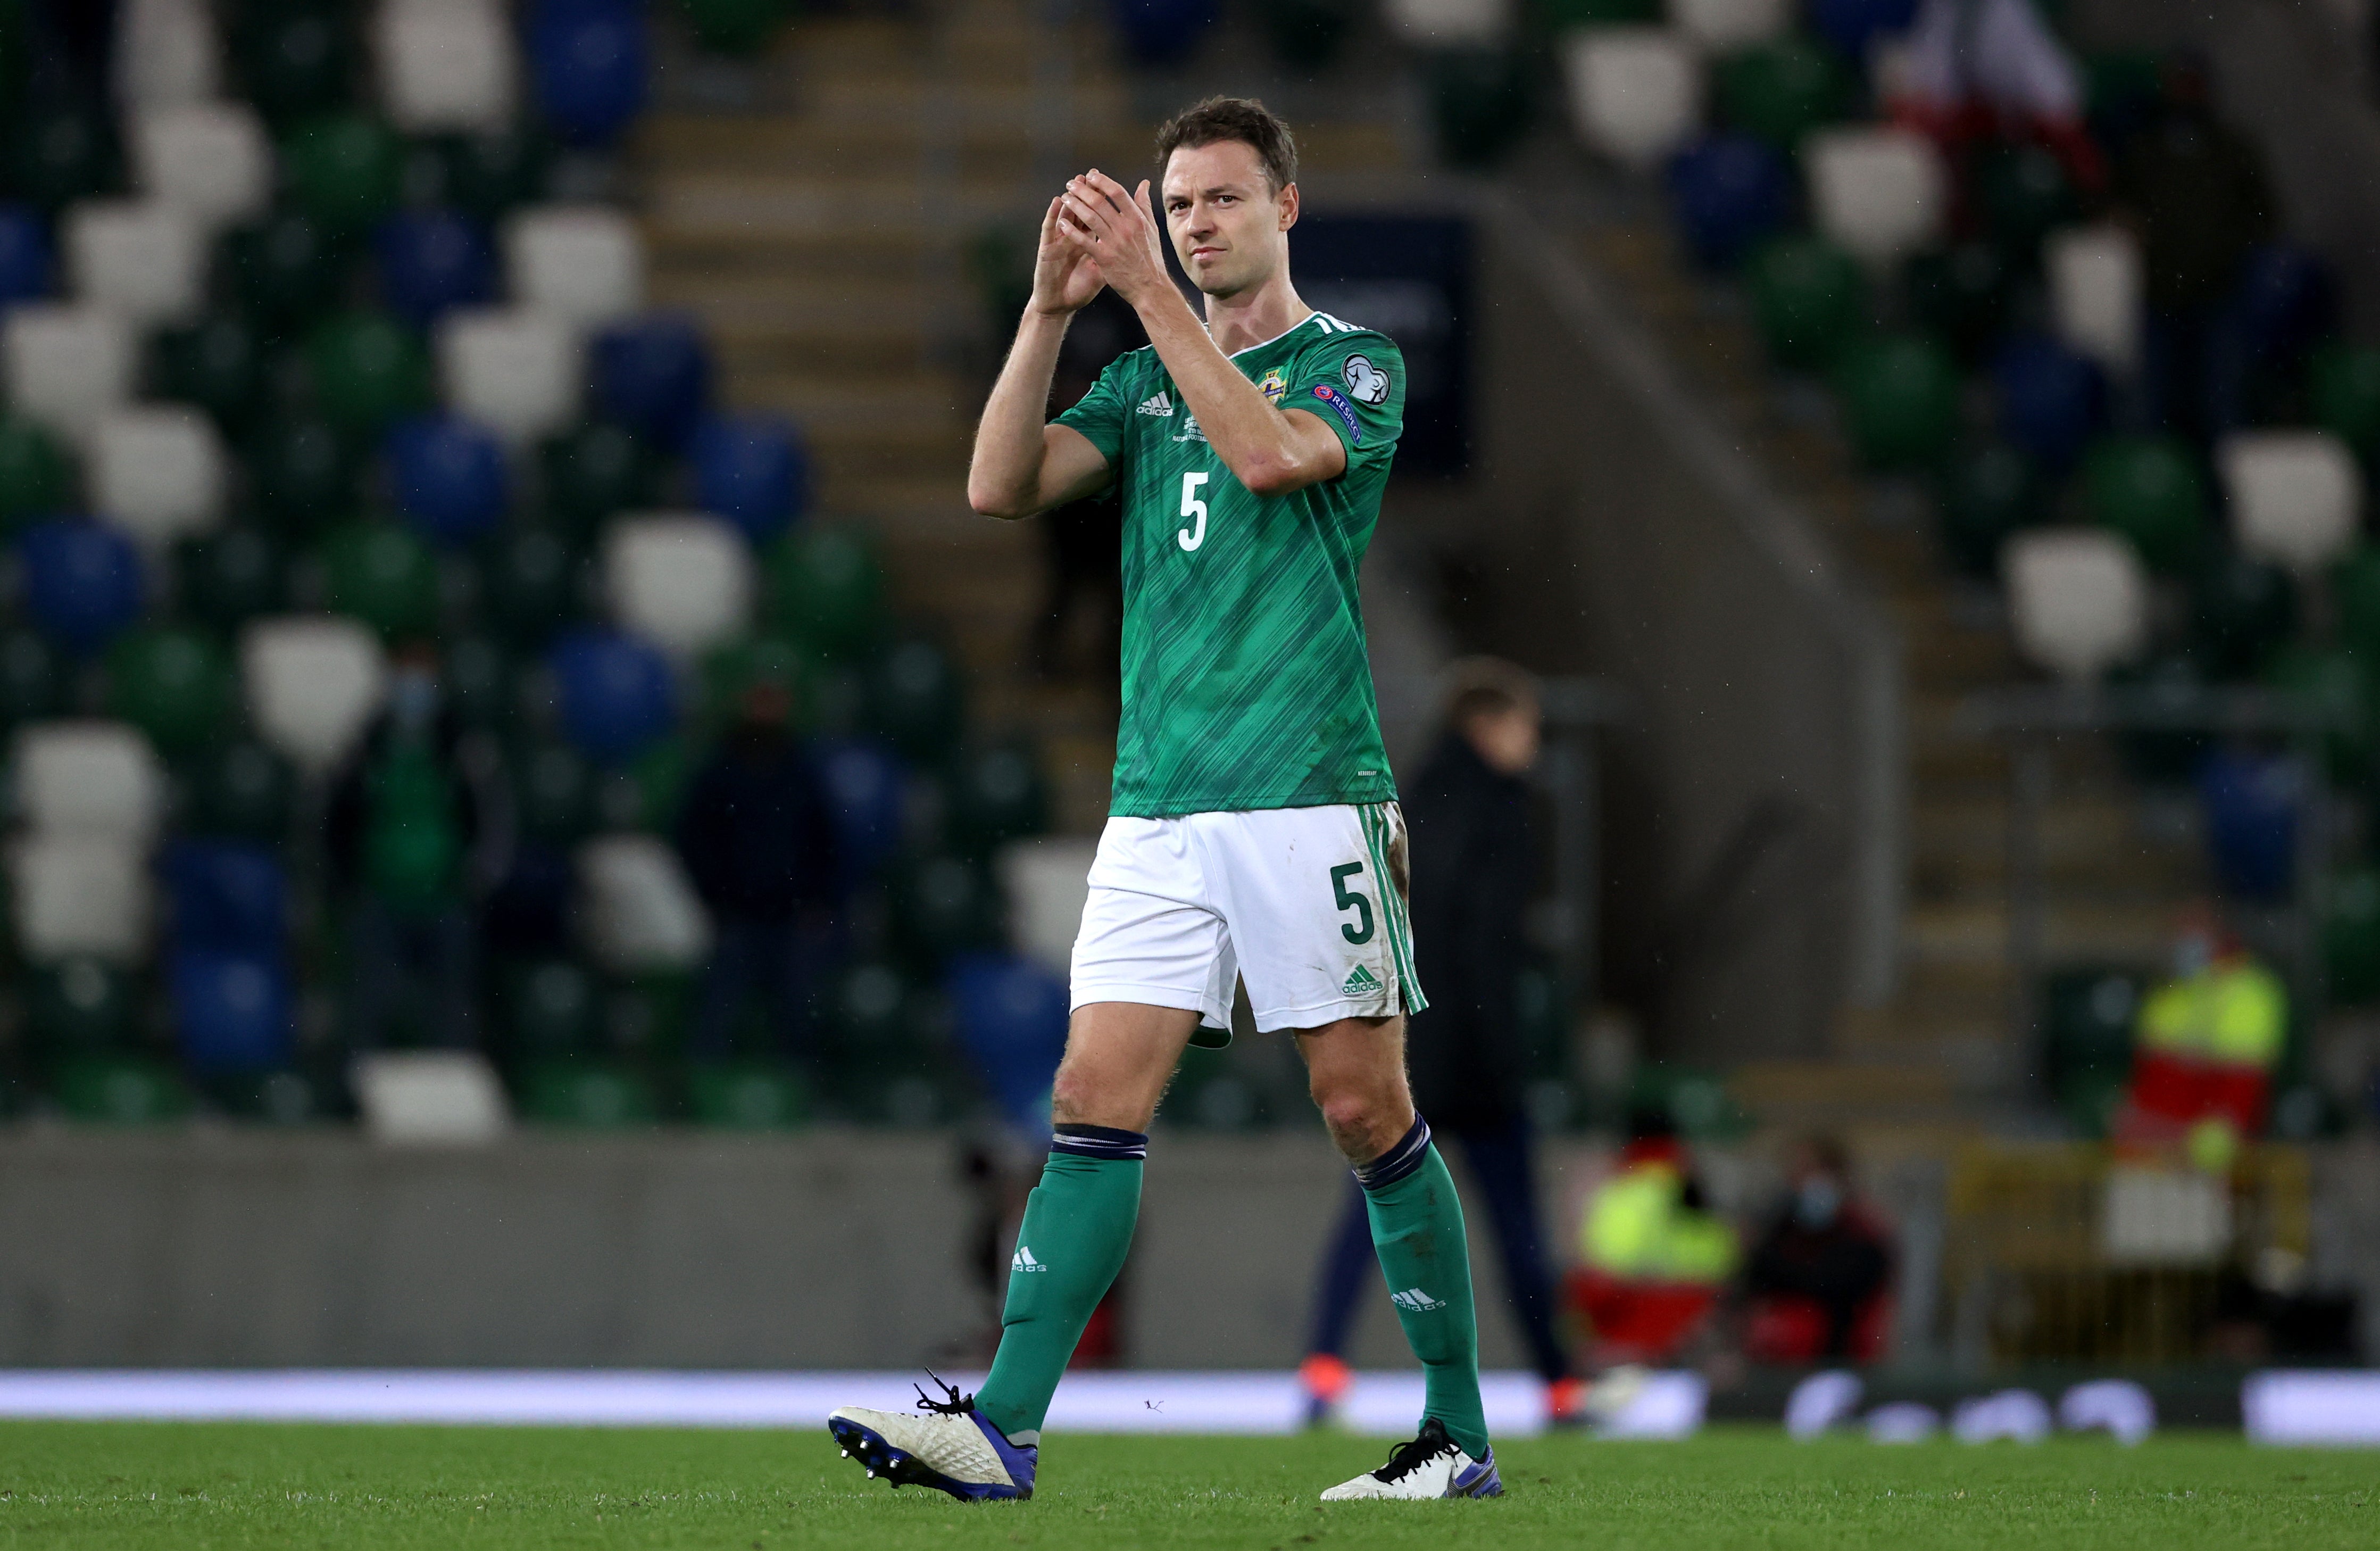 Jonny Evans is back in the Northern Ireland squad after injury (Liam McBurney/PA)